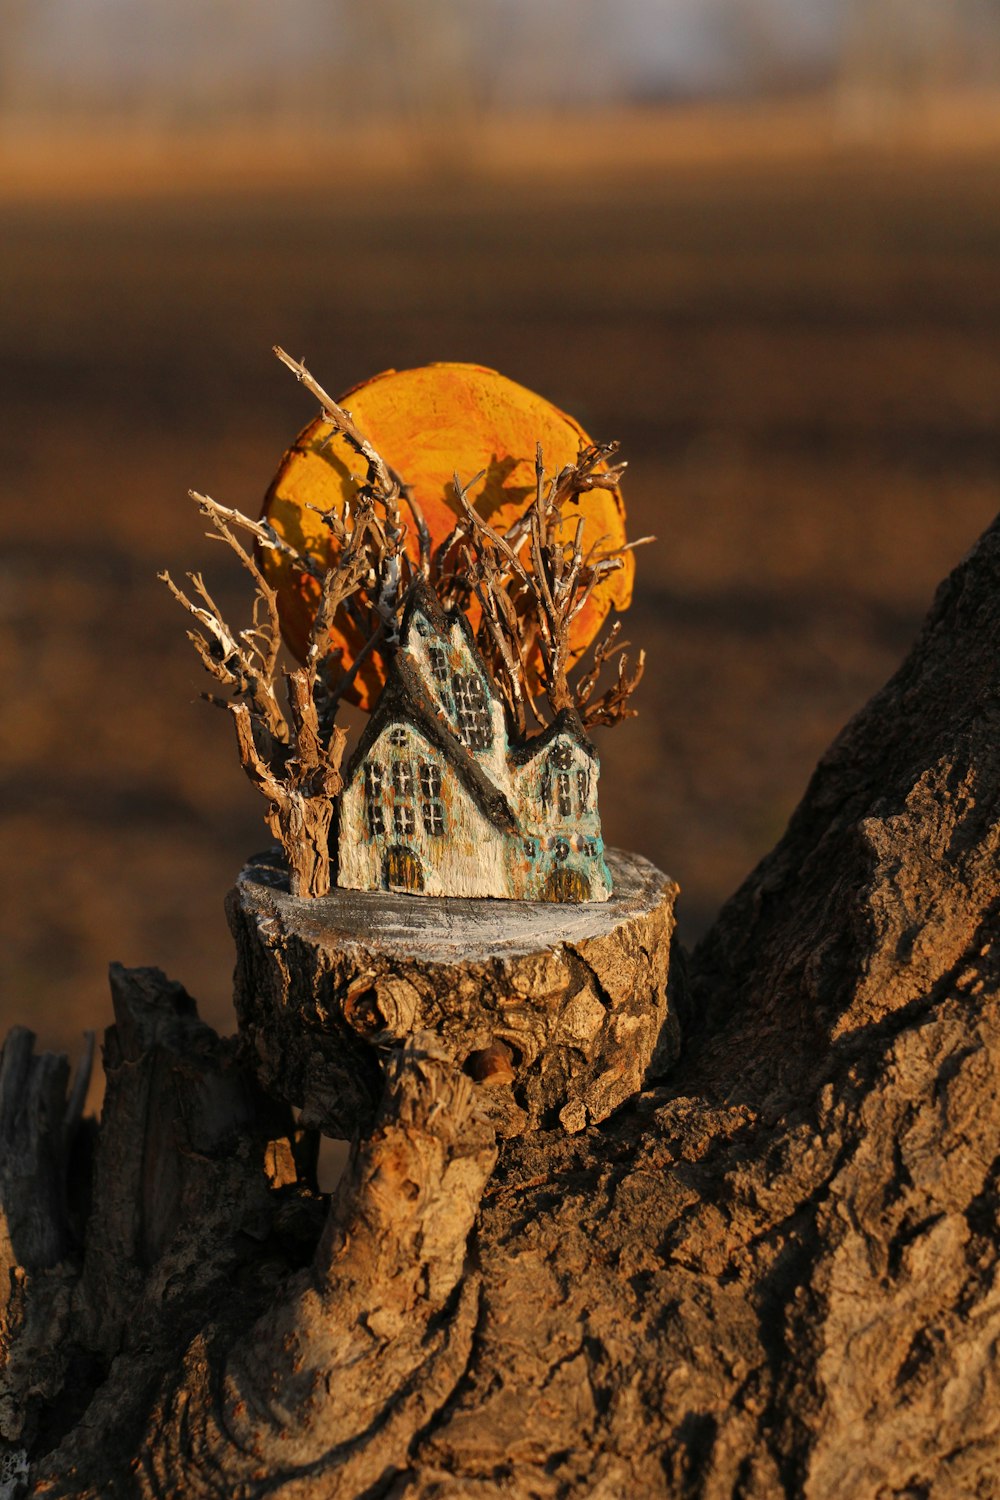 a small house on top of a tree stump